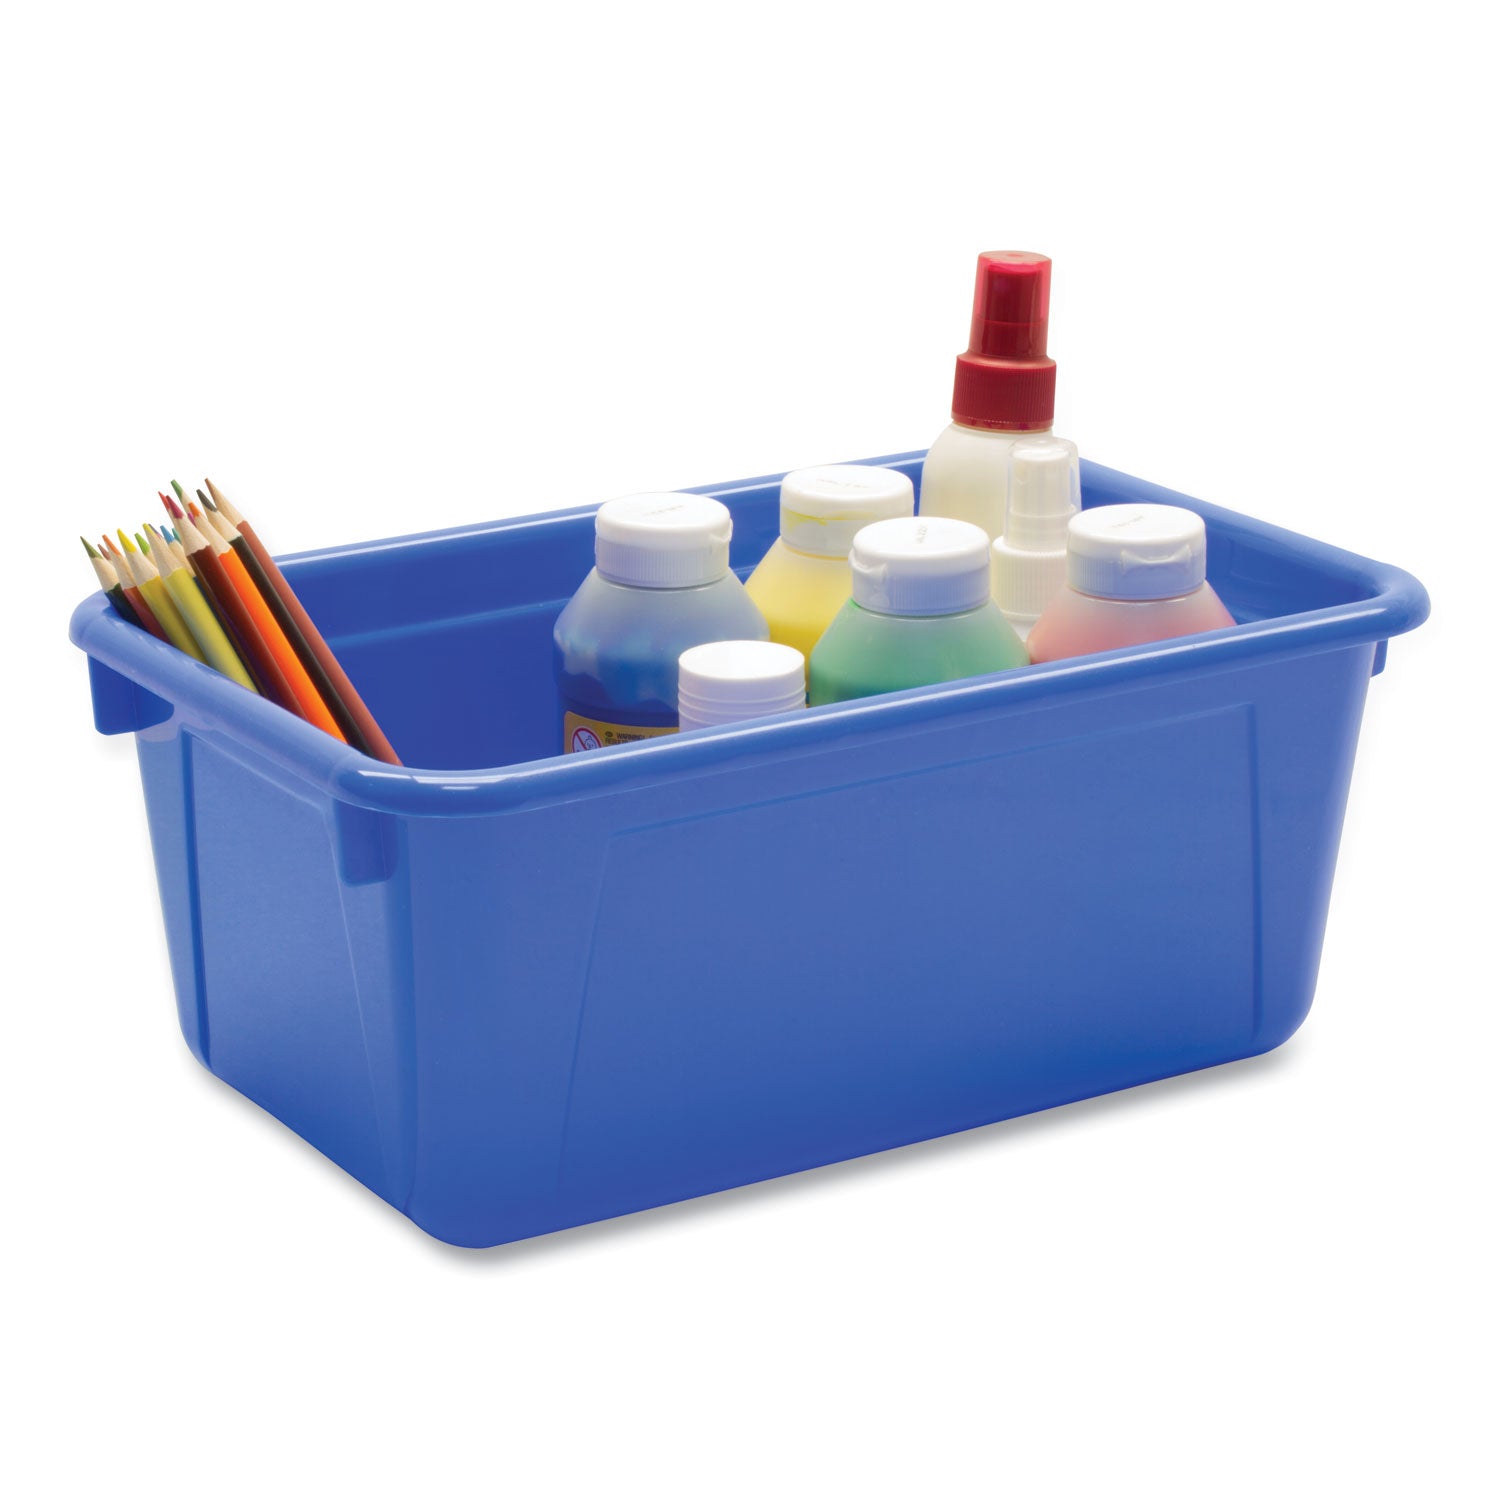 cubby-bin-with-lid-1-section-2-gal-82-x-125-x-115-assorted-colors-5-pack_stx62406u05c - 2